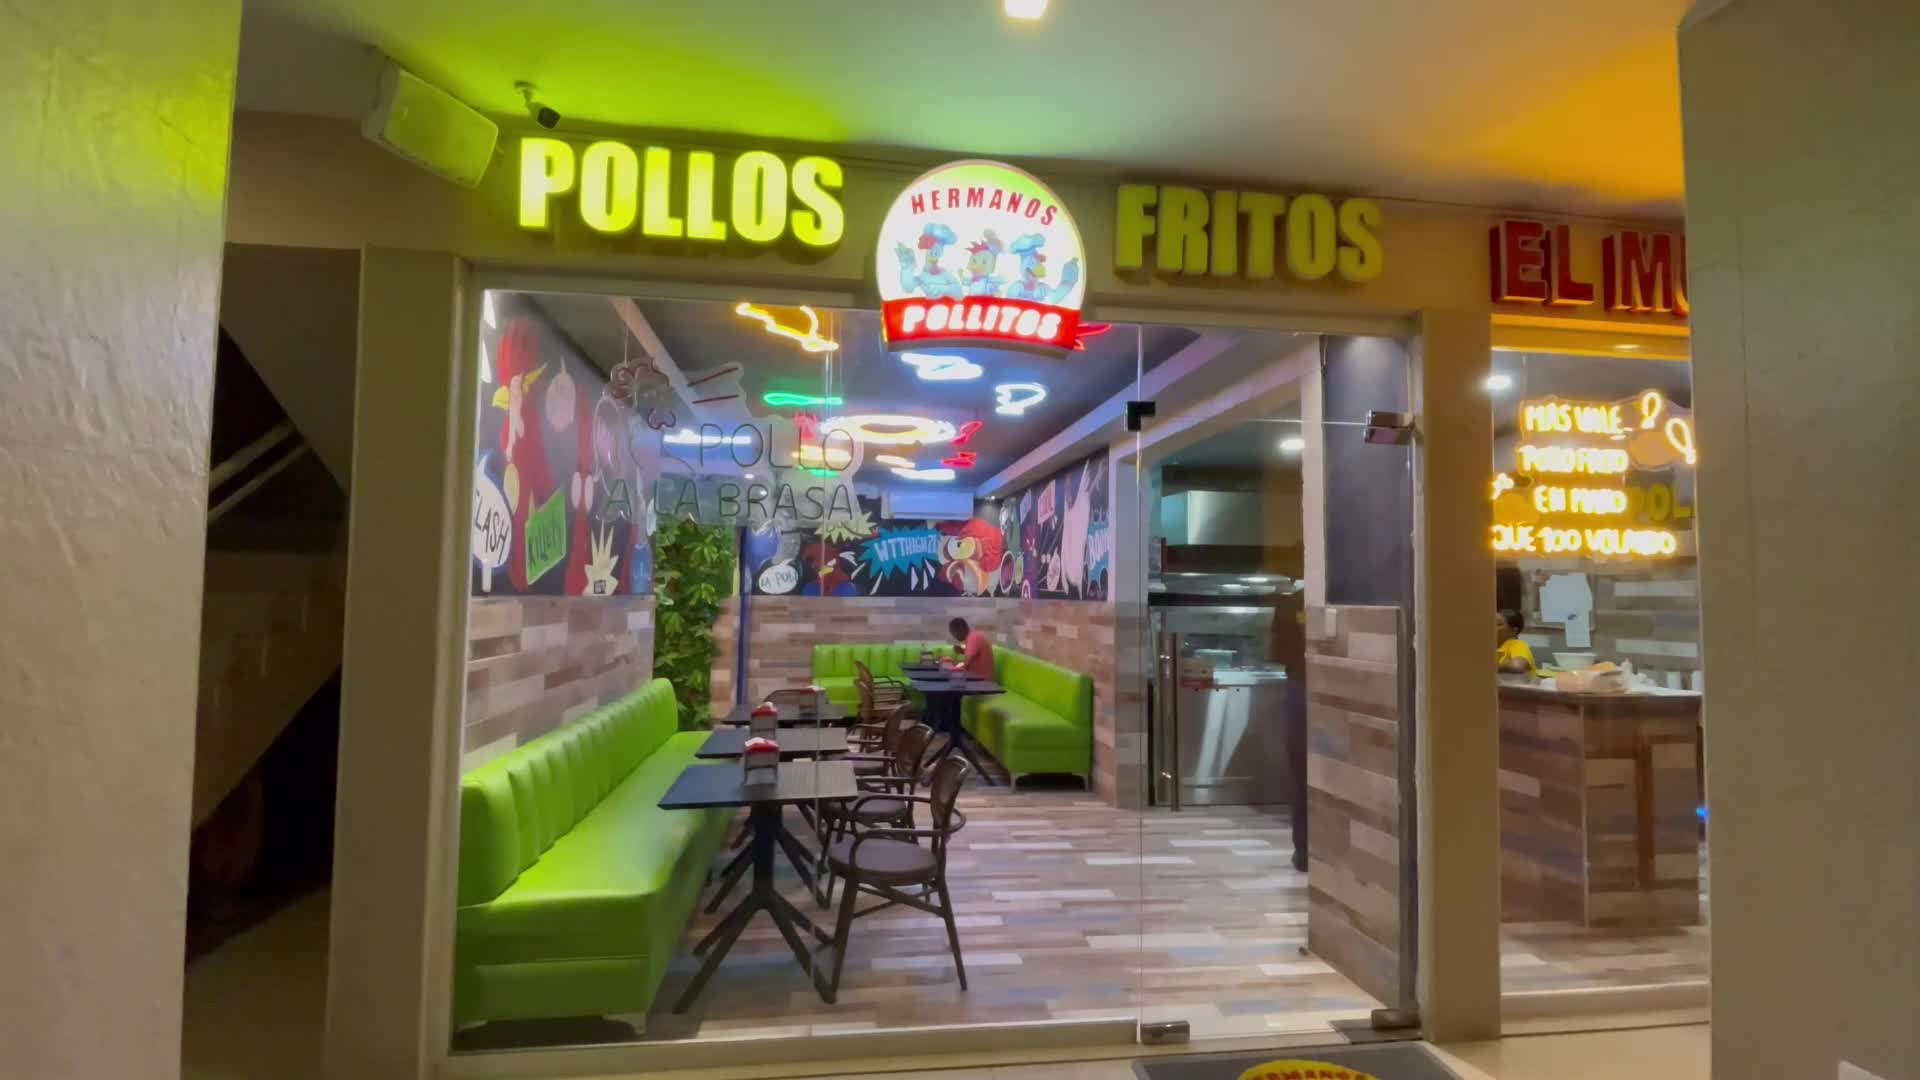 A promotional video showing the Hermanos Pollitos restaurant at Playa Palmera Beach Resort, guests, interiors and dishes.  